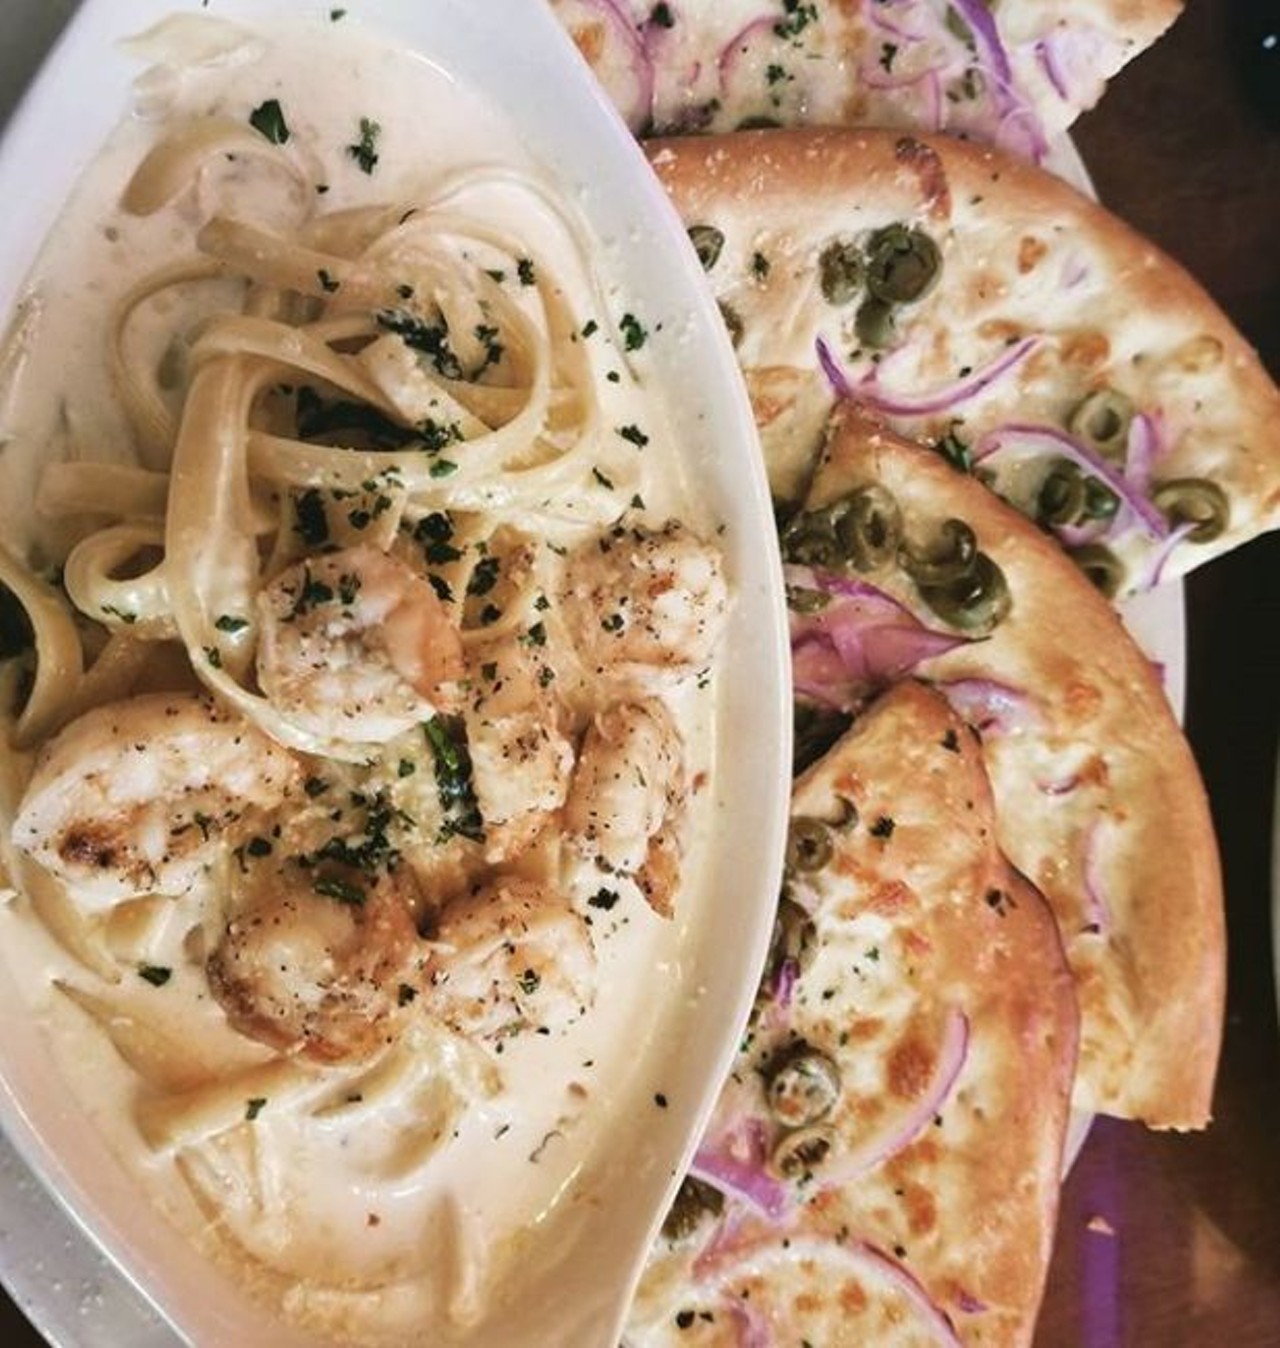 Guillermo&#146;s
618 McCullough Ave., (210) 223-5587, guillermosdowntown.com
At Guillermo&#146;s you have large variety of pastas, steaks, salads and pizzas, whether you&#146;re looking for something hearty, light or just right.
Photo via Instagram, amberquaid